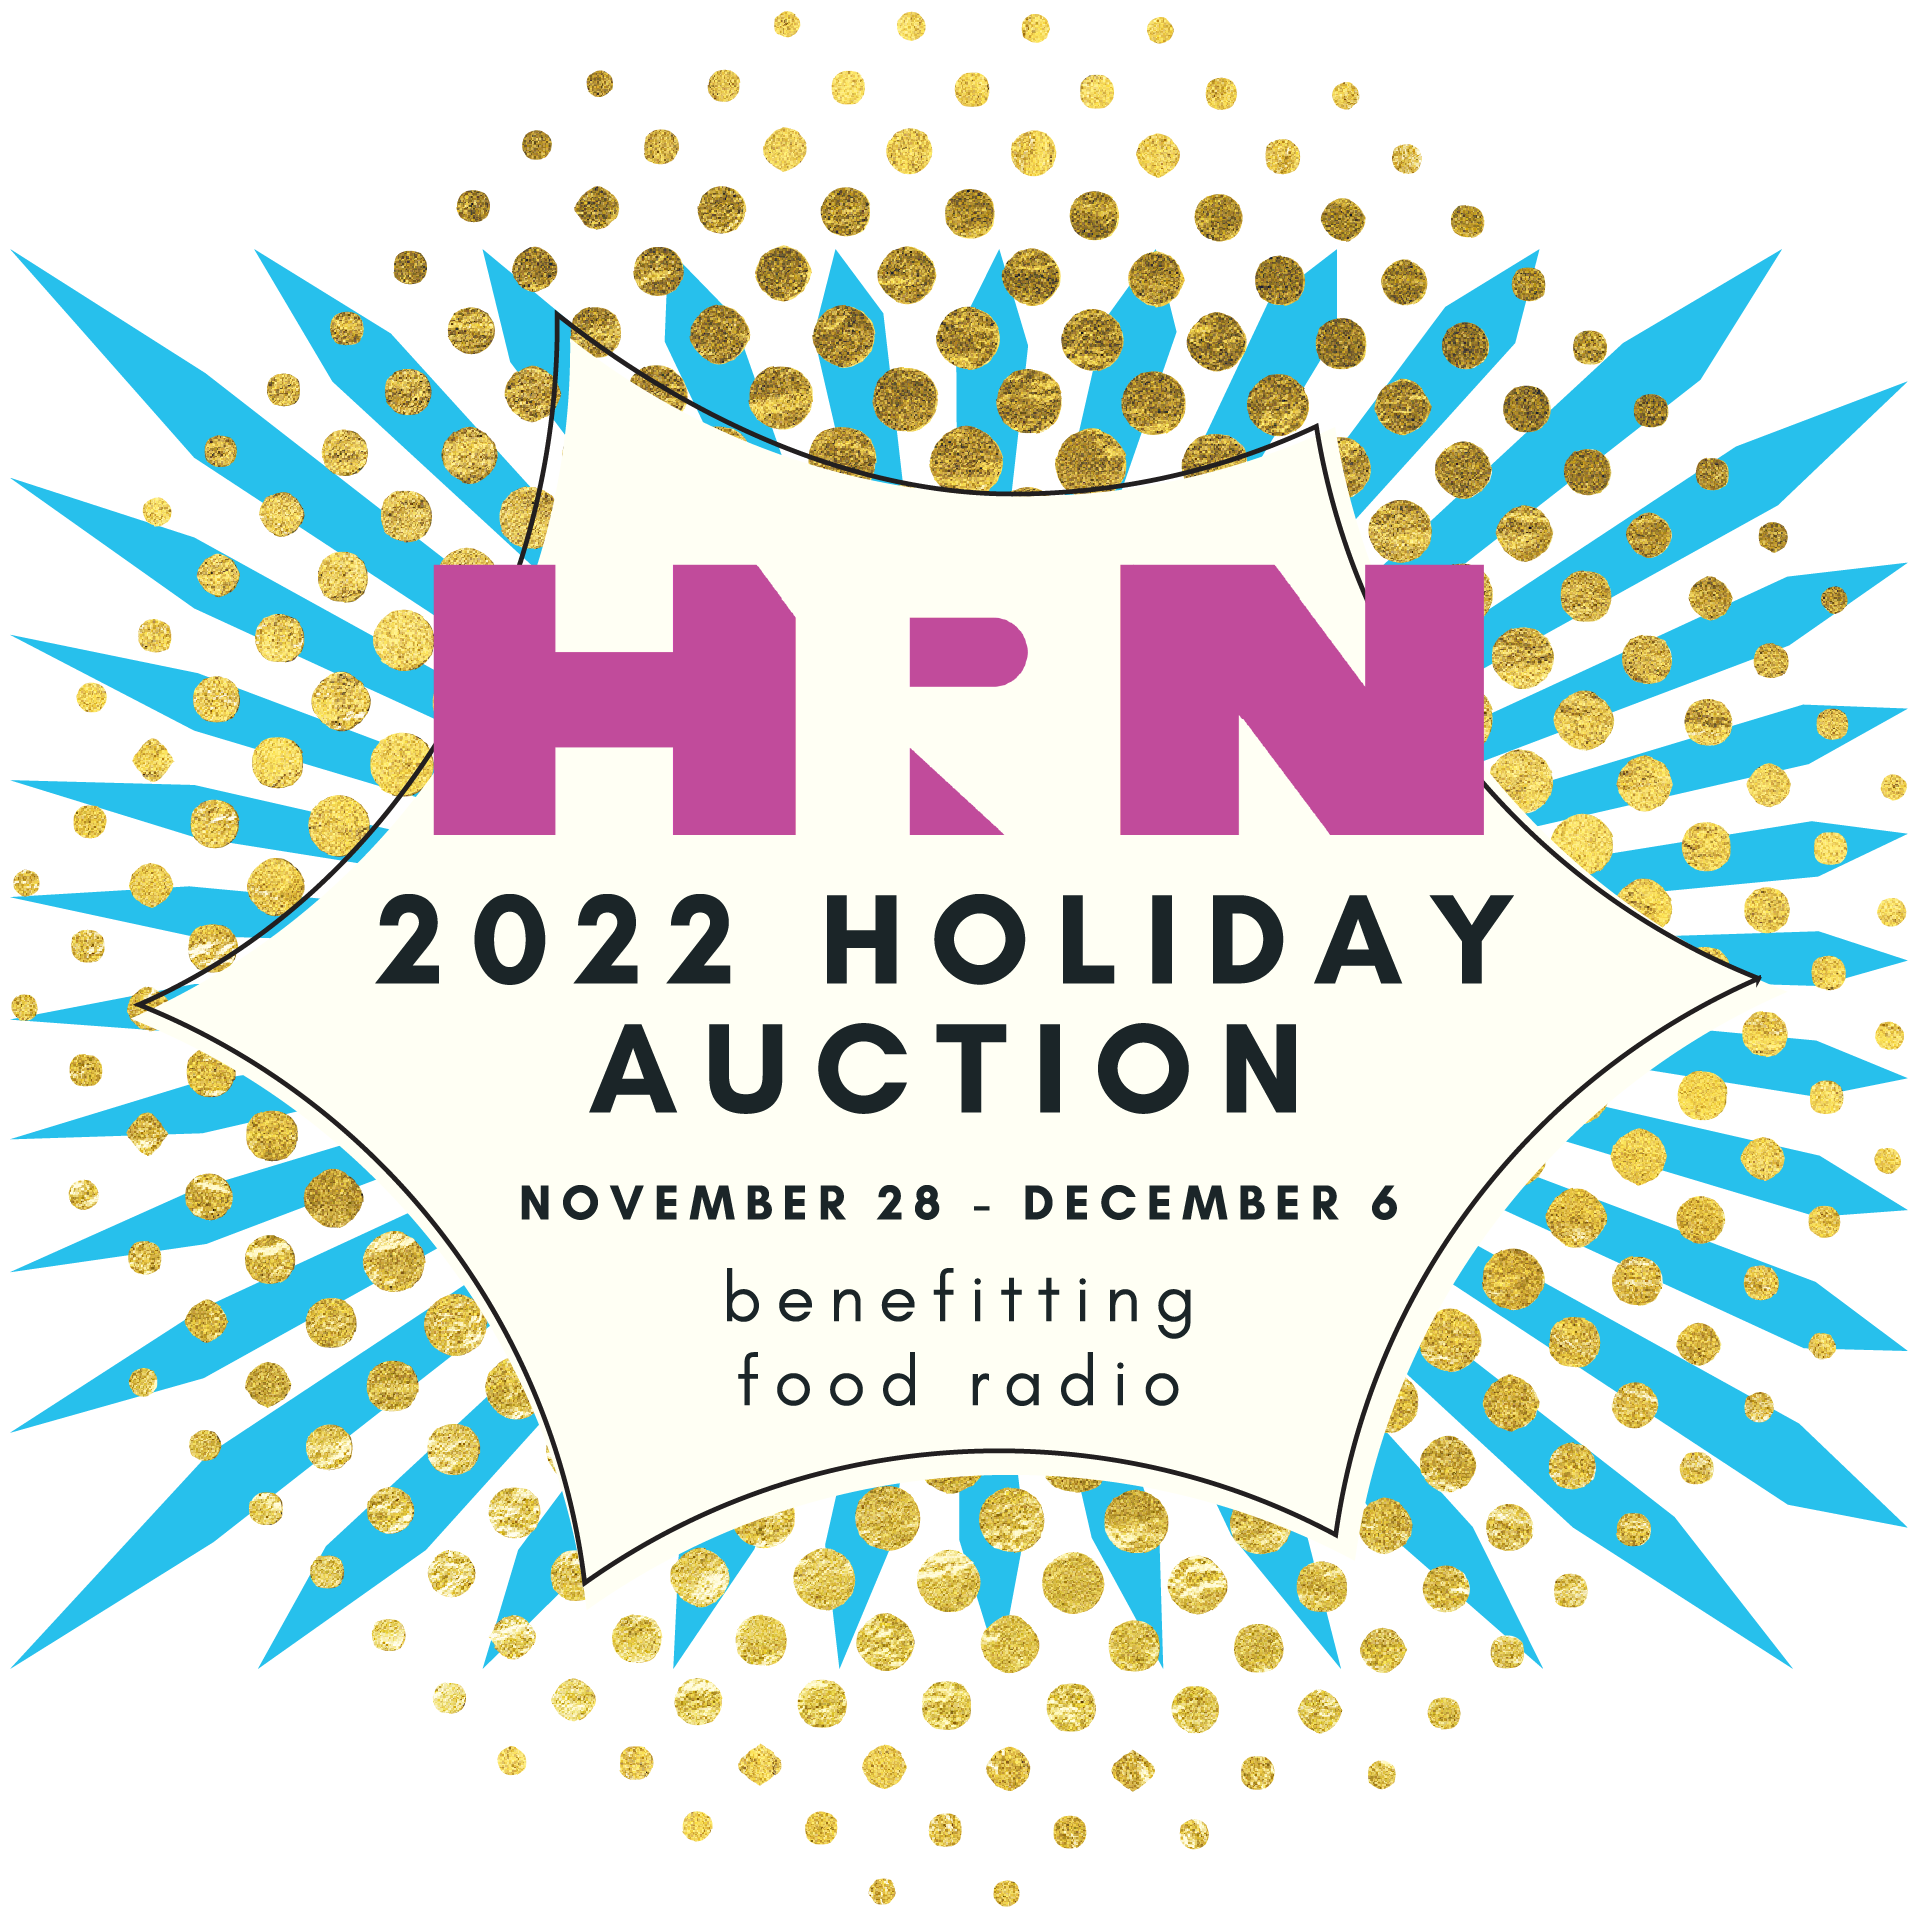 HRN 2022 Holiday Auction